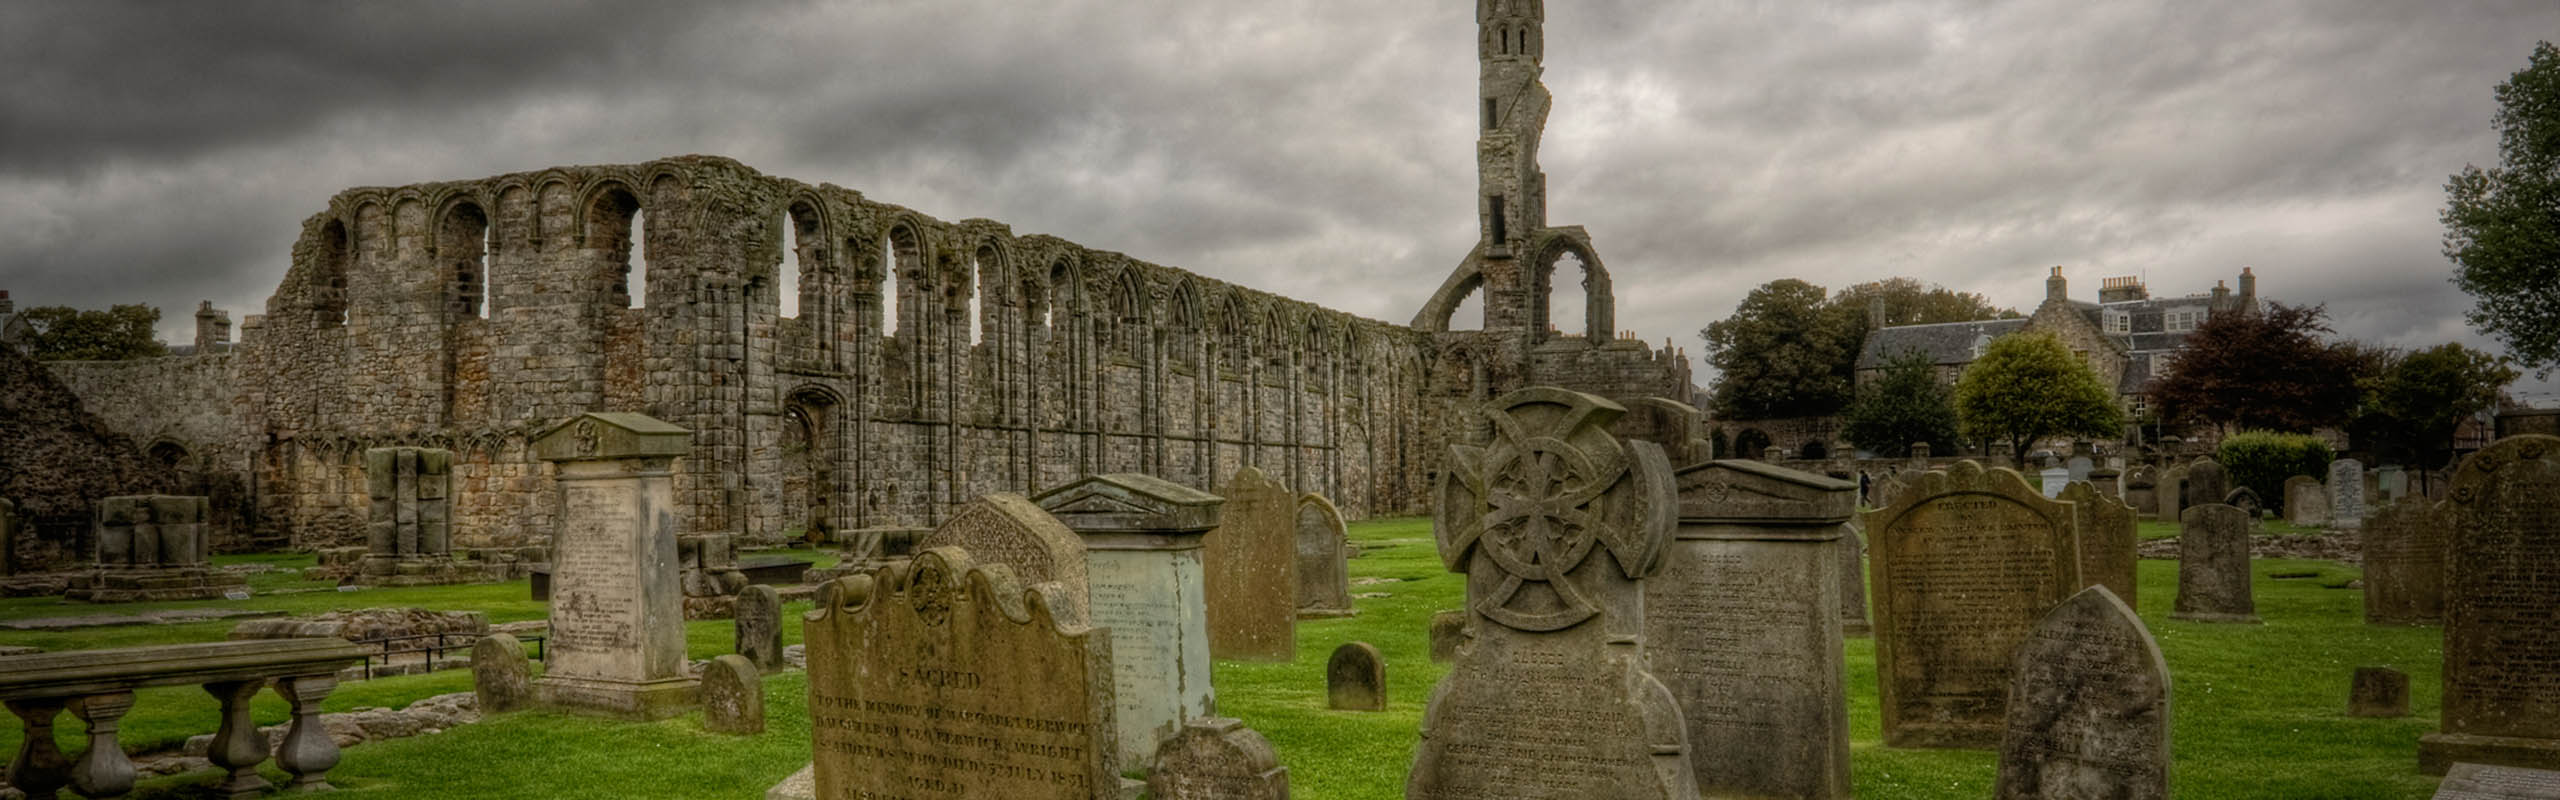 The graveyard and abbey in St Andrews Scotland